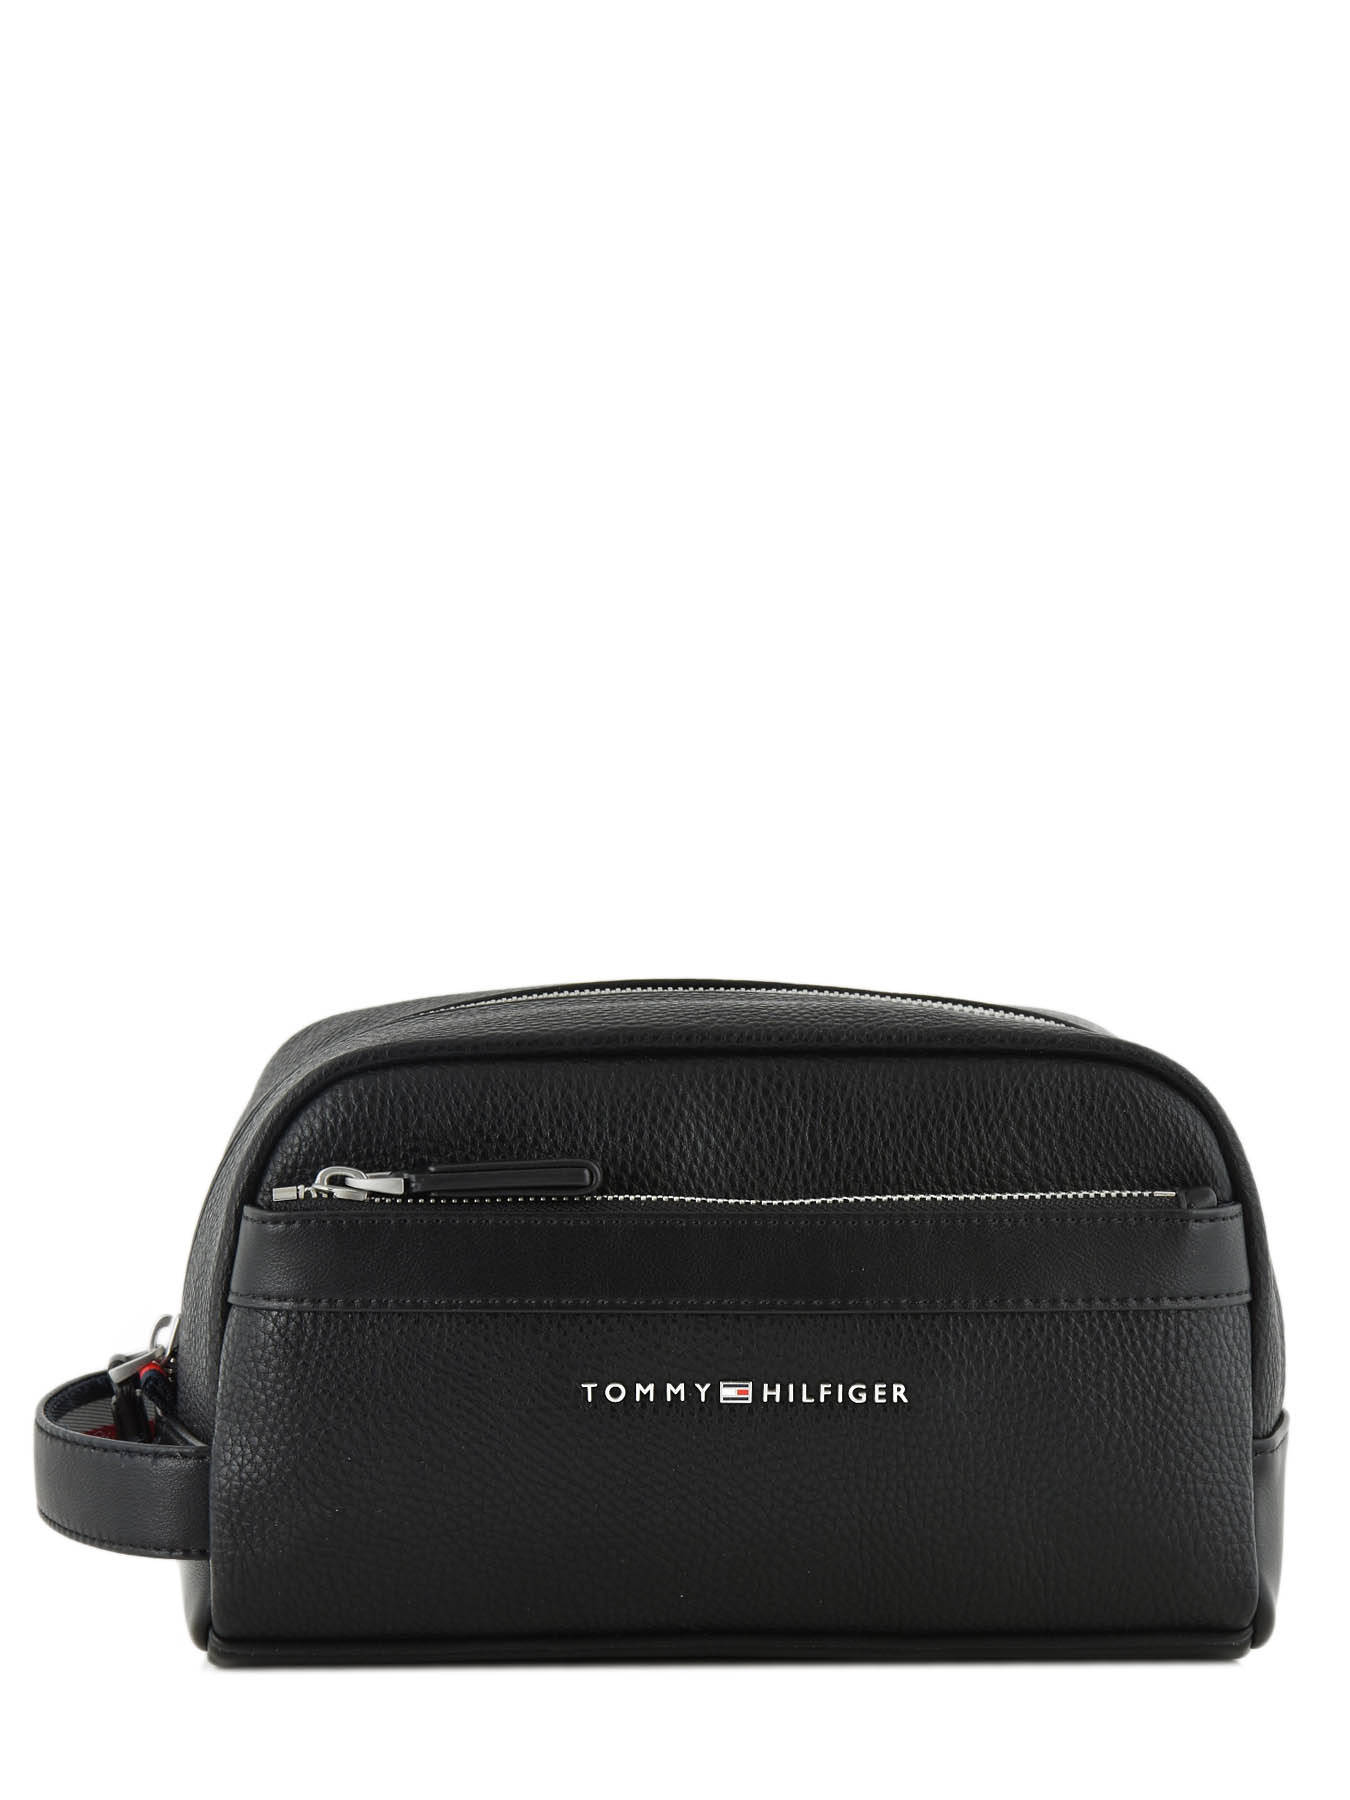 Tommy Hilfiger Toiletry kit AM0AM04577 - best prices